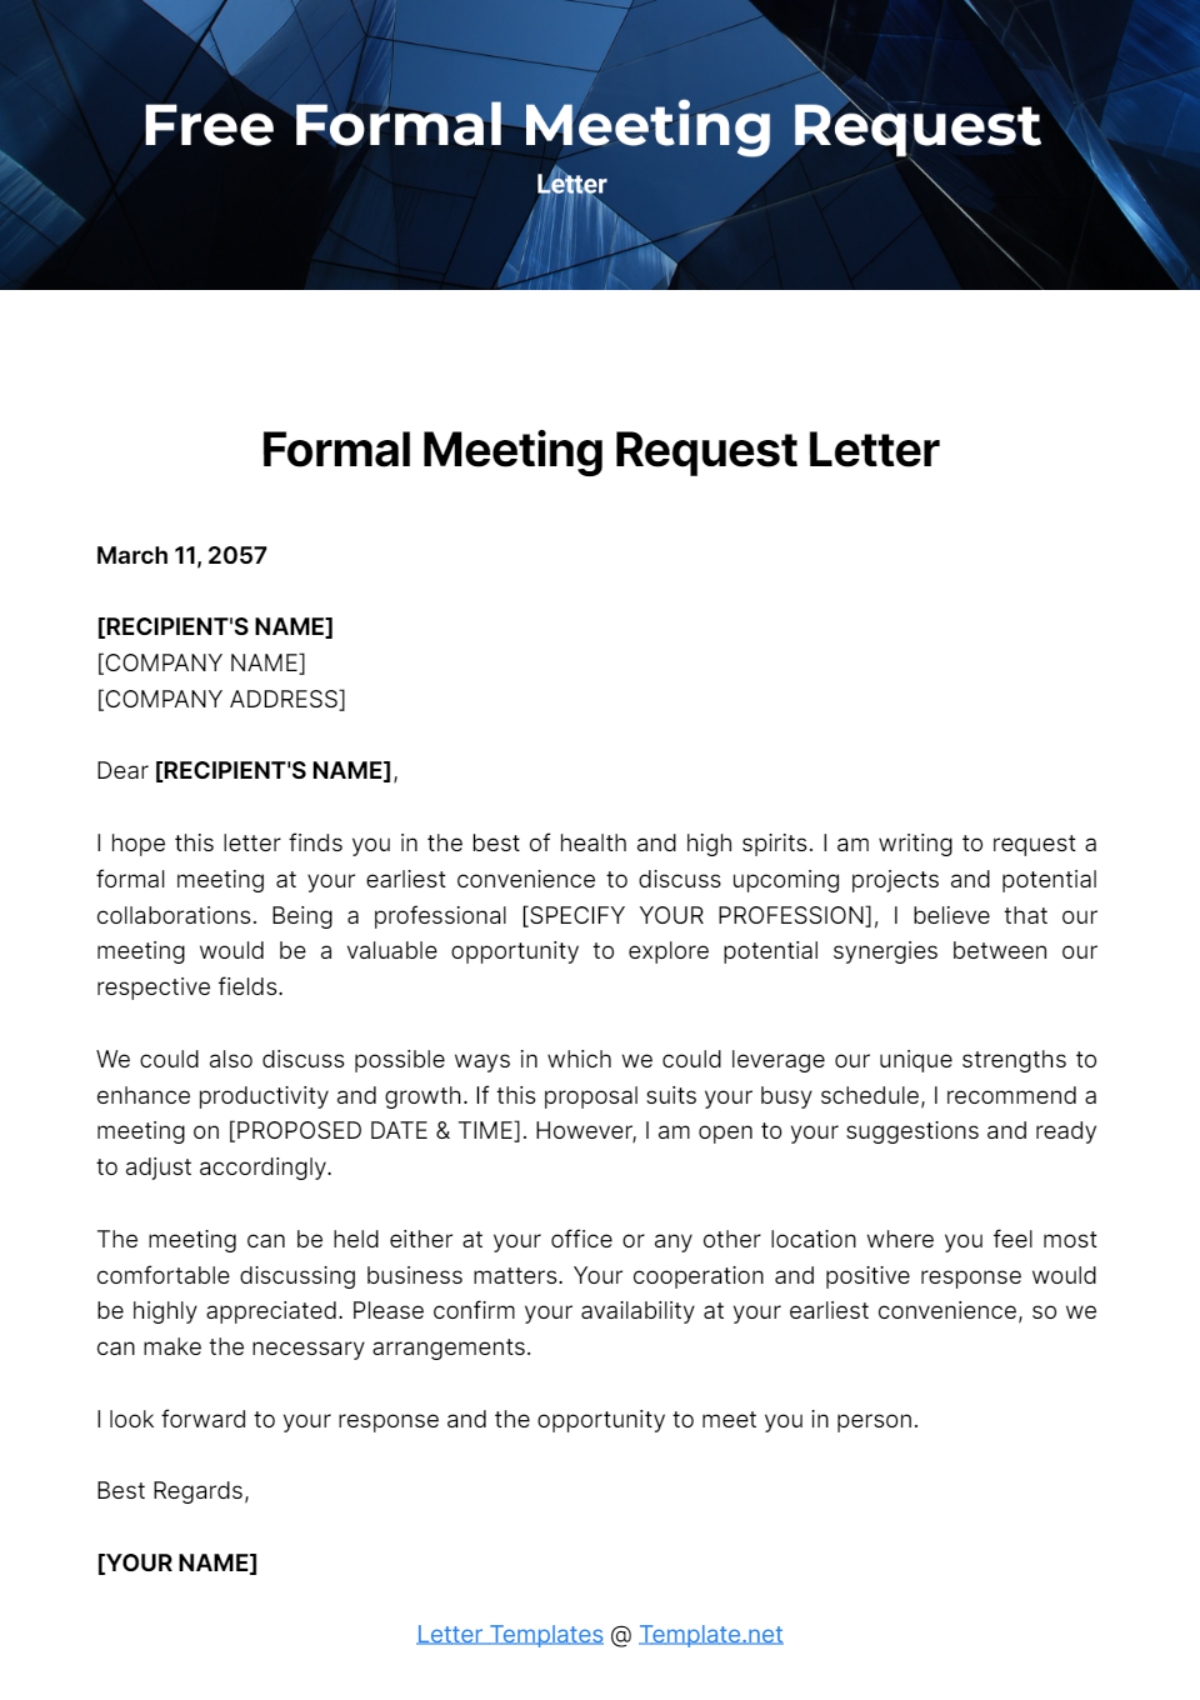 Free Formal Meeting Request Letter Template